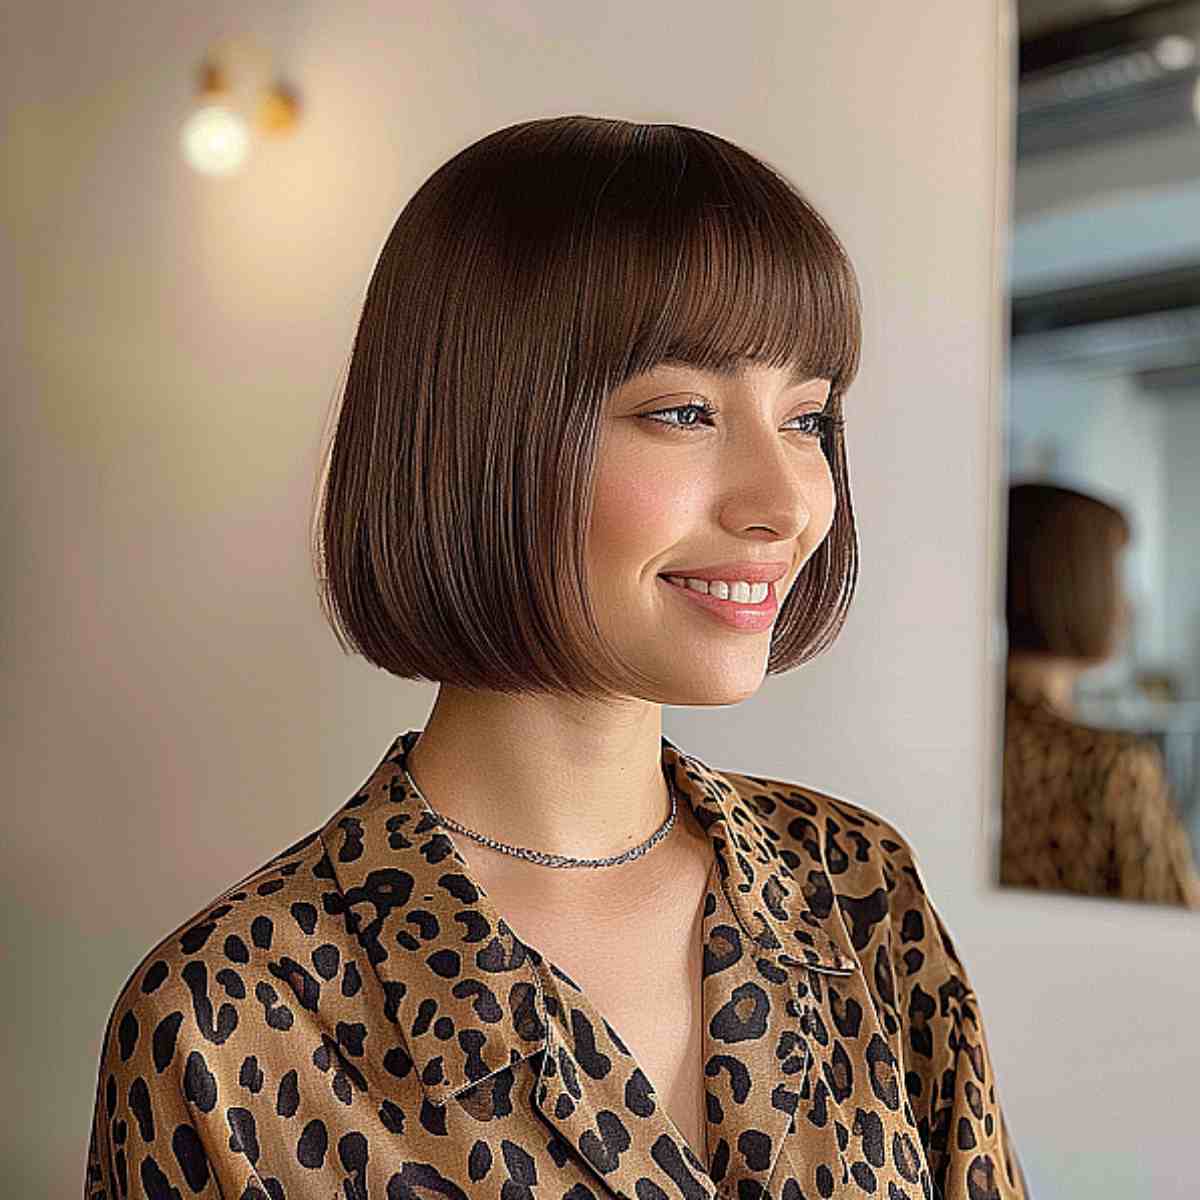 Chin-Length, One-Length Bob with Blunt Fringe